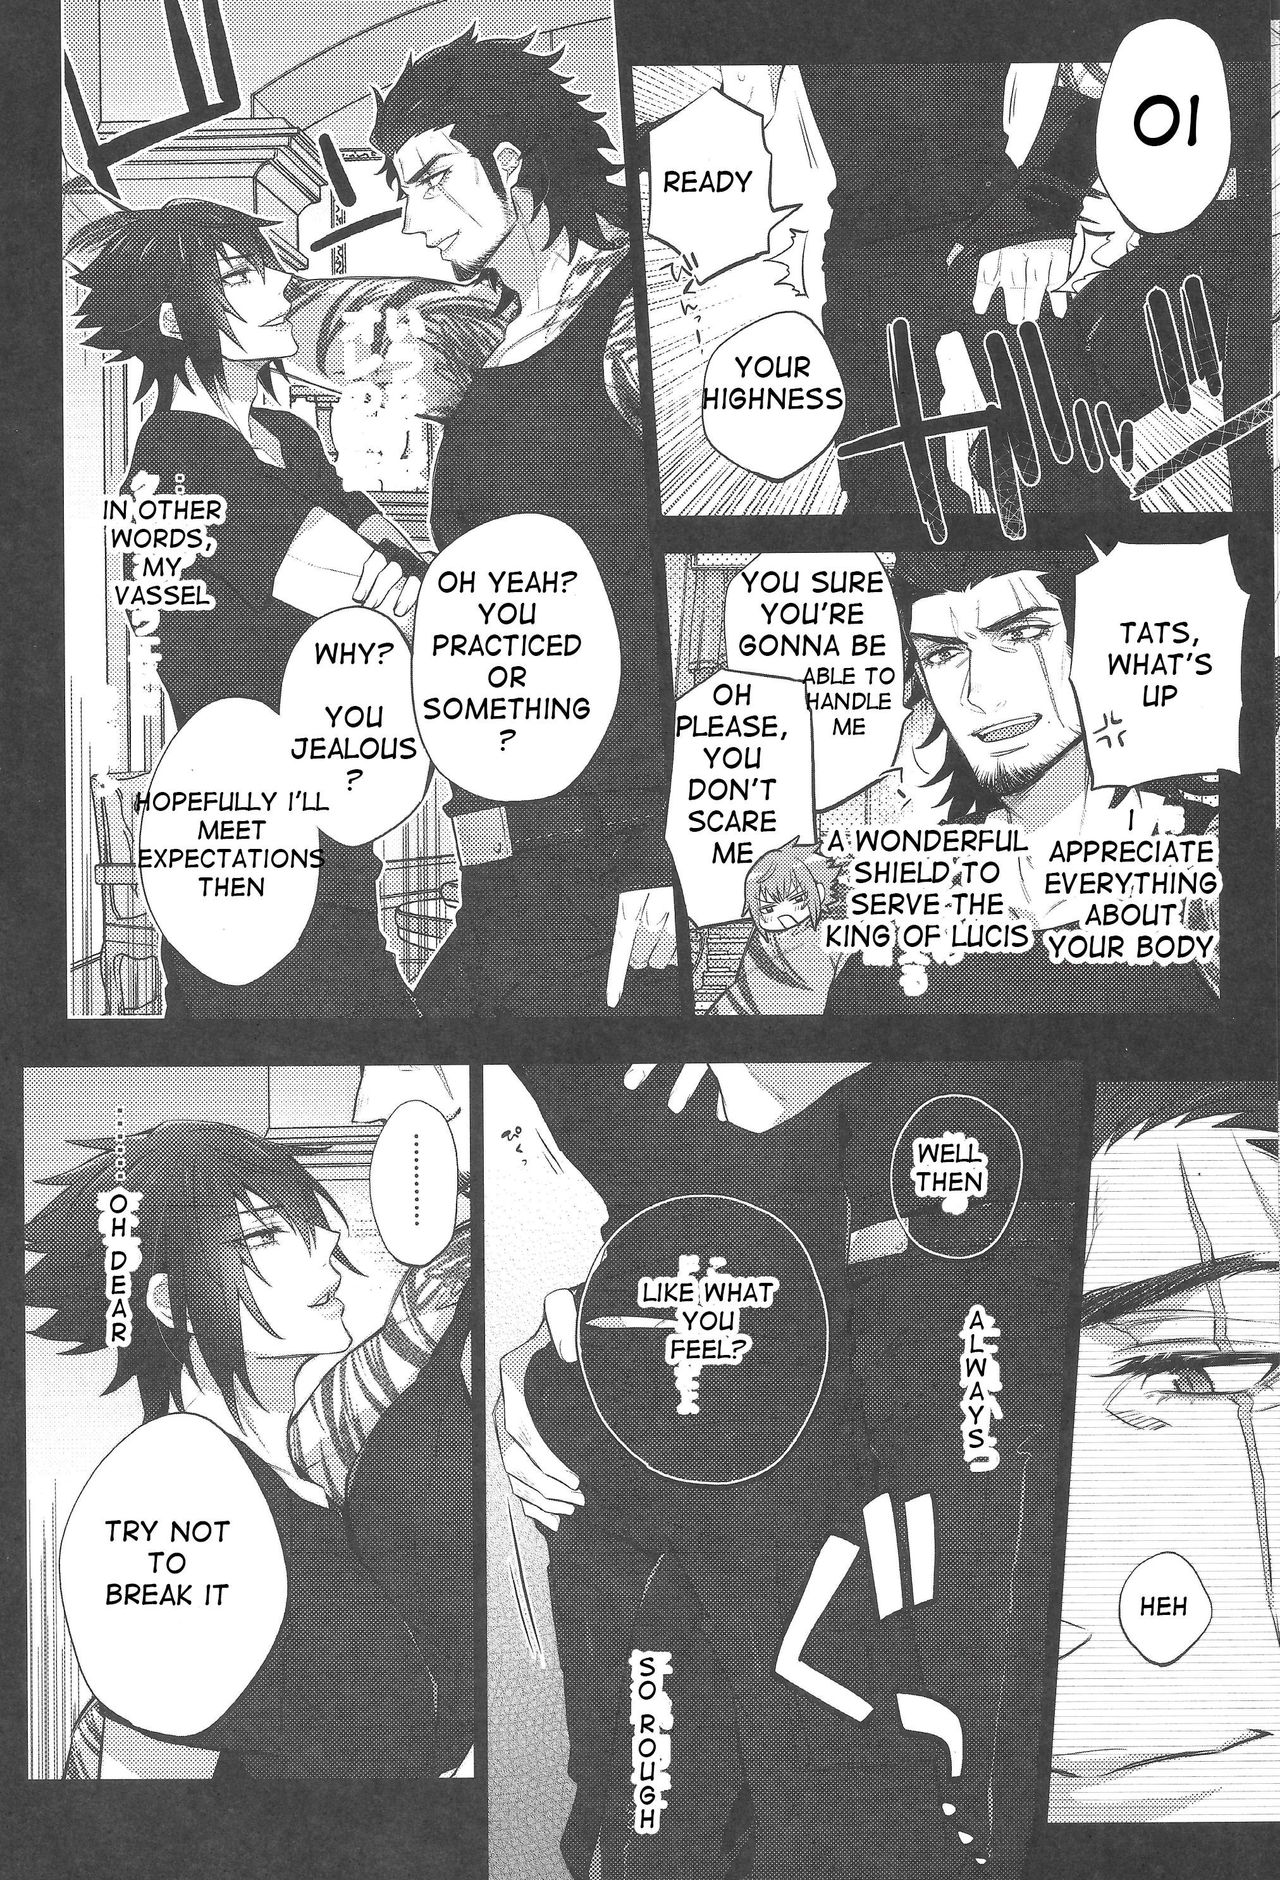 (TWINKLE MIRAGE5) [Inukare (Inuyashiki)] Aisare ♥ Ouji Visual Kei | Our Beloved Prince (Final Fantasy XV) [English] page 9 full